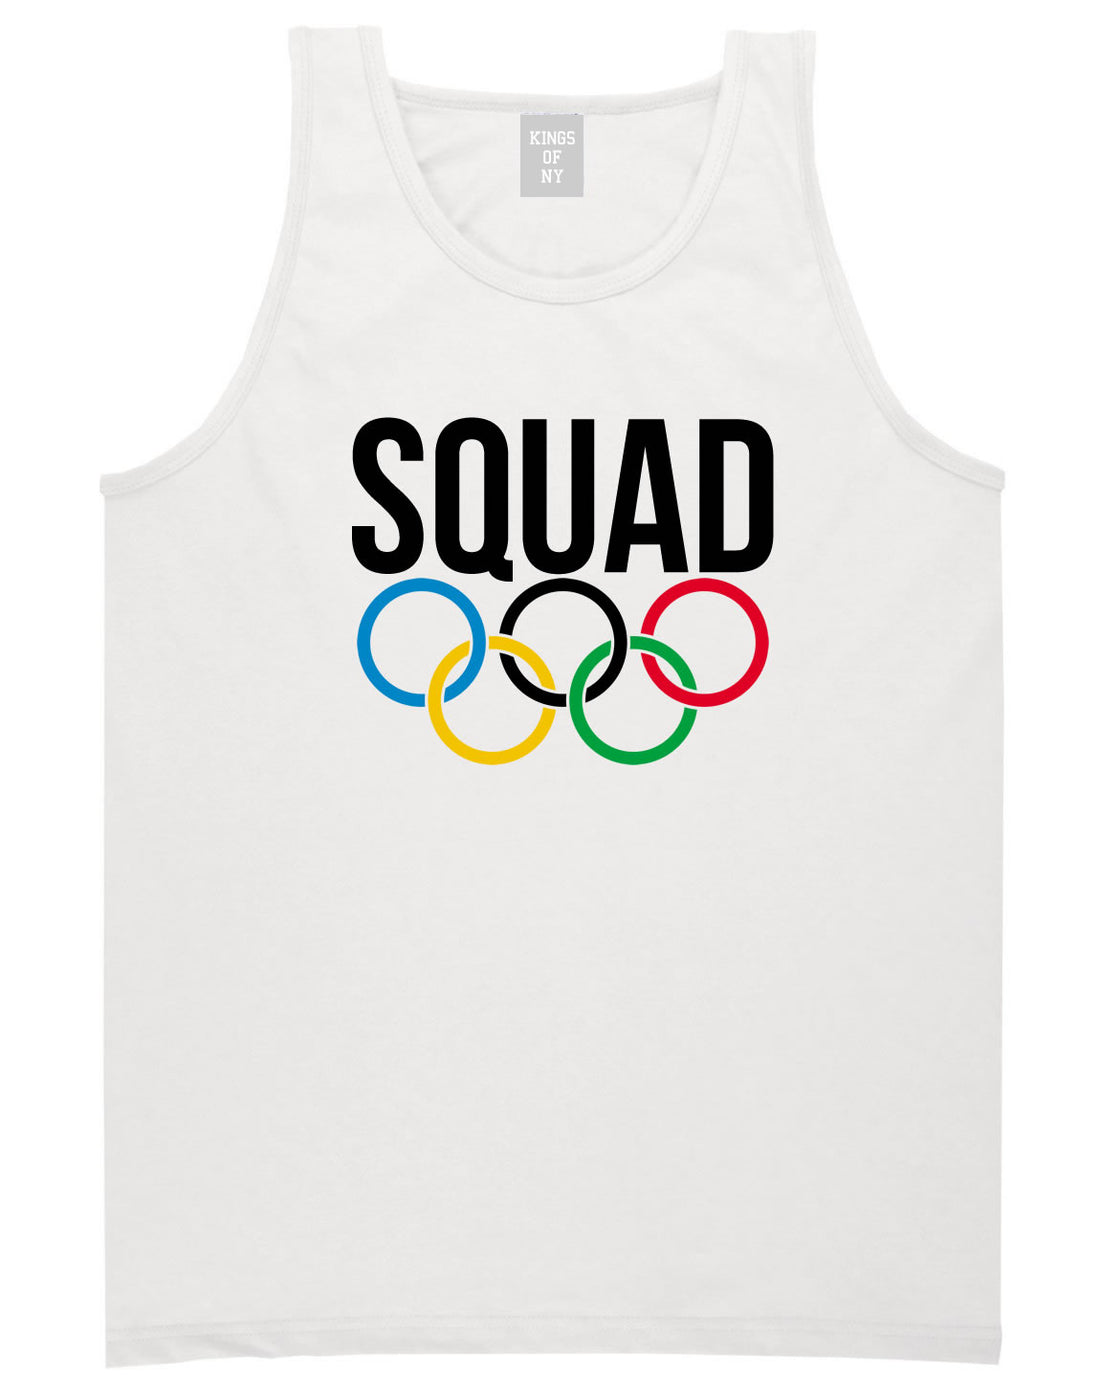 Squad Olympic Rings Logo Tank Top in White